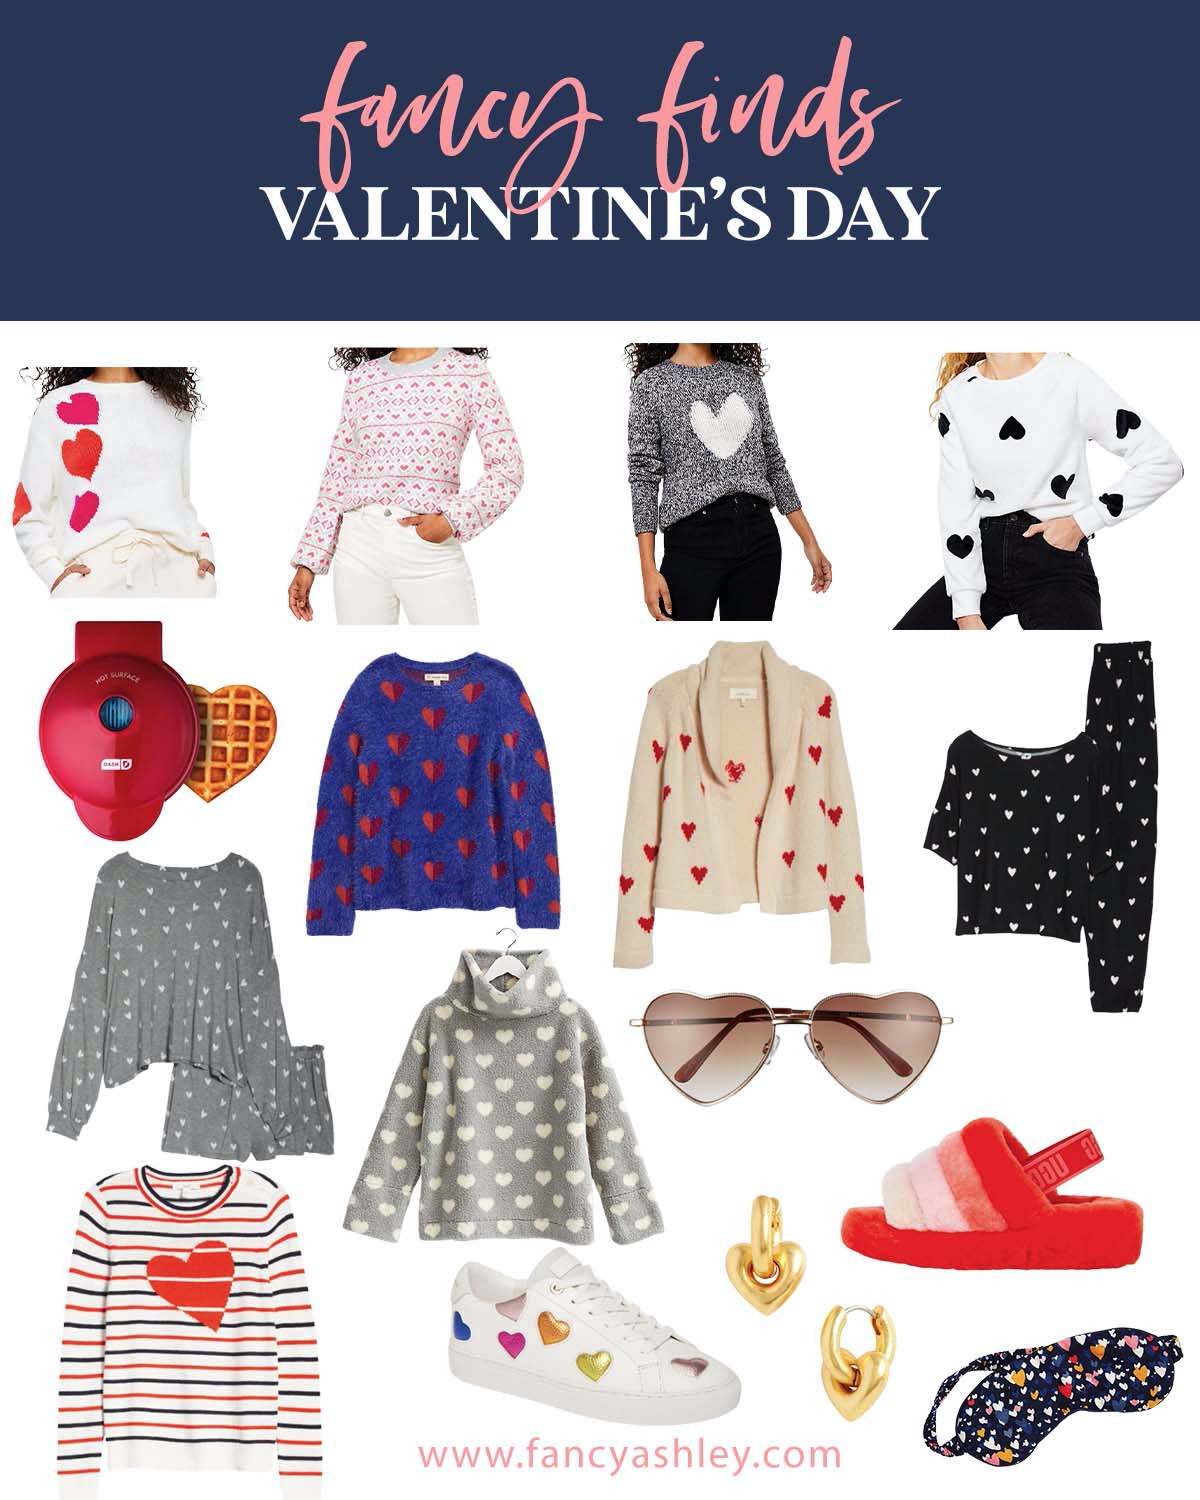 Valentine's Day by popular Houston life and style blog, Fancy Ashley: collage image of Ugg slippers, heart print sweater, heart print shirts, heart print sneakers, heart print sleep mask, heart print pajama sets, heart shape sunglasses, gold heart earrings, and heart shape waffle iron. 